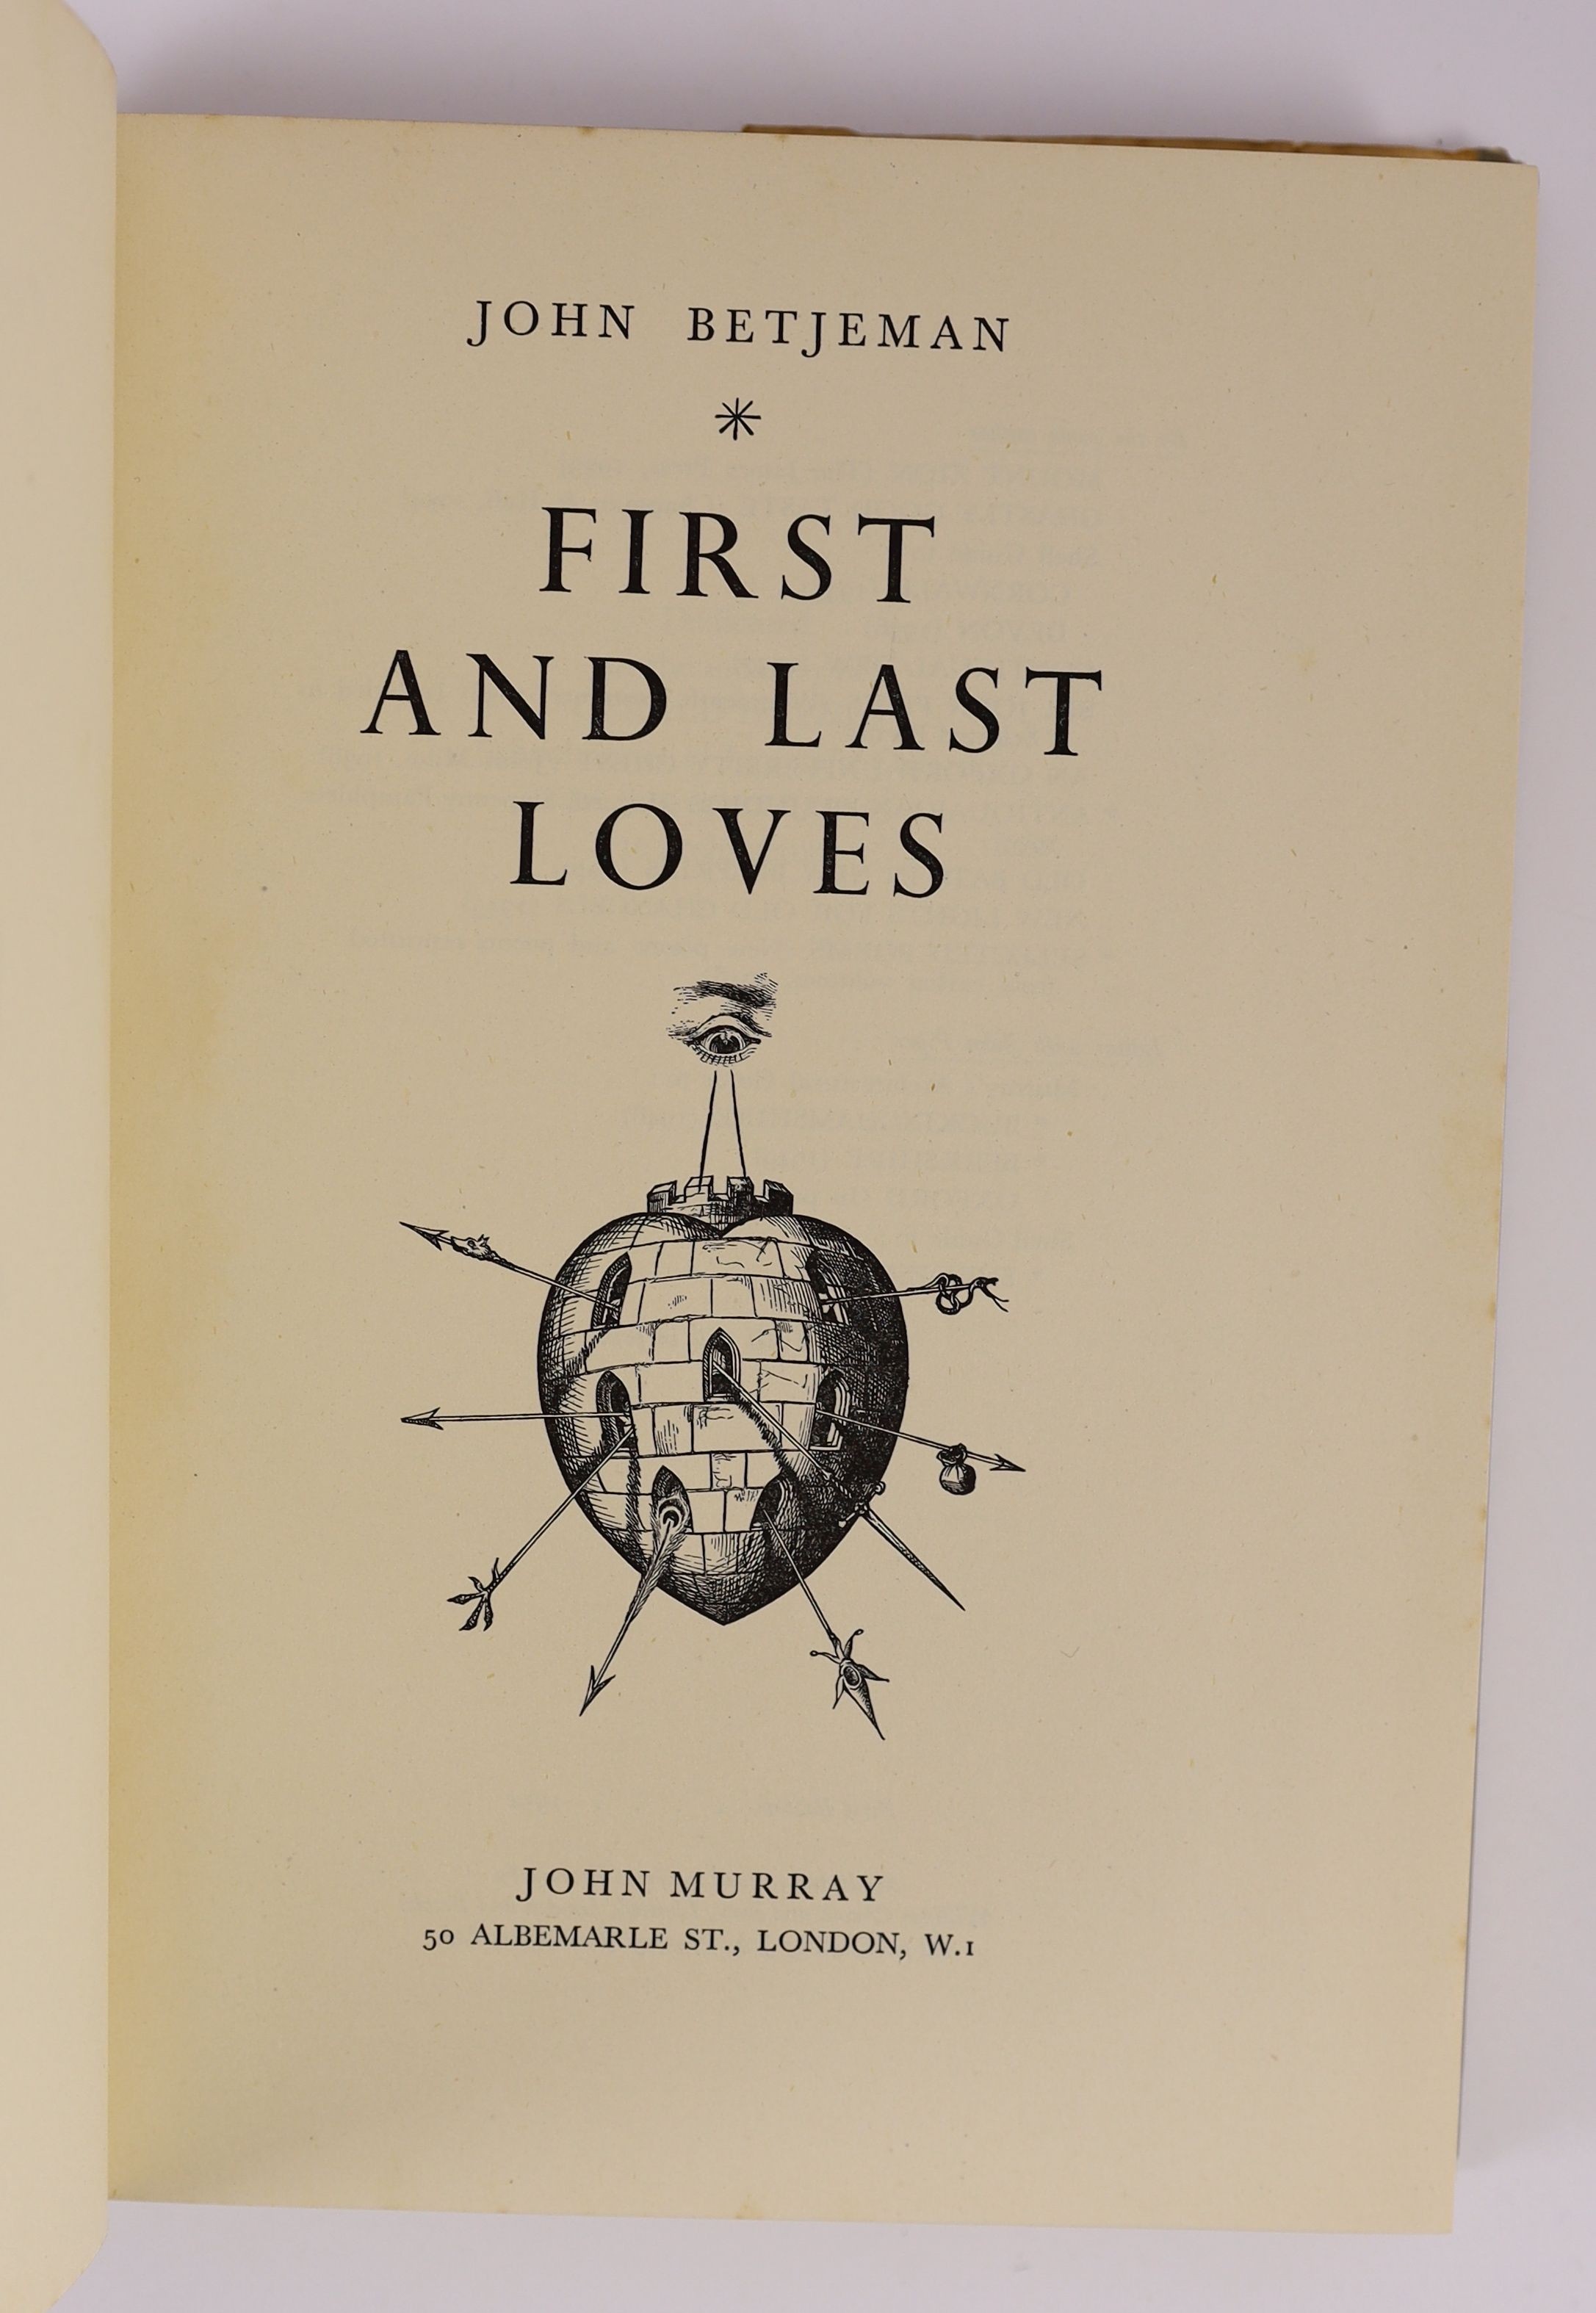 Betjeman, John - 3 works:- Continual Dew, 1st edition, original cloth in unclipped d/j, with price sticker,(8/6 net), John Murray, London, 1937; First and Last Loves, in price clipped d/j, John Murray, London 1952 and Su